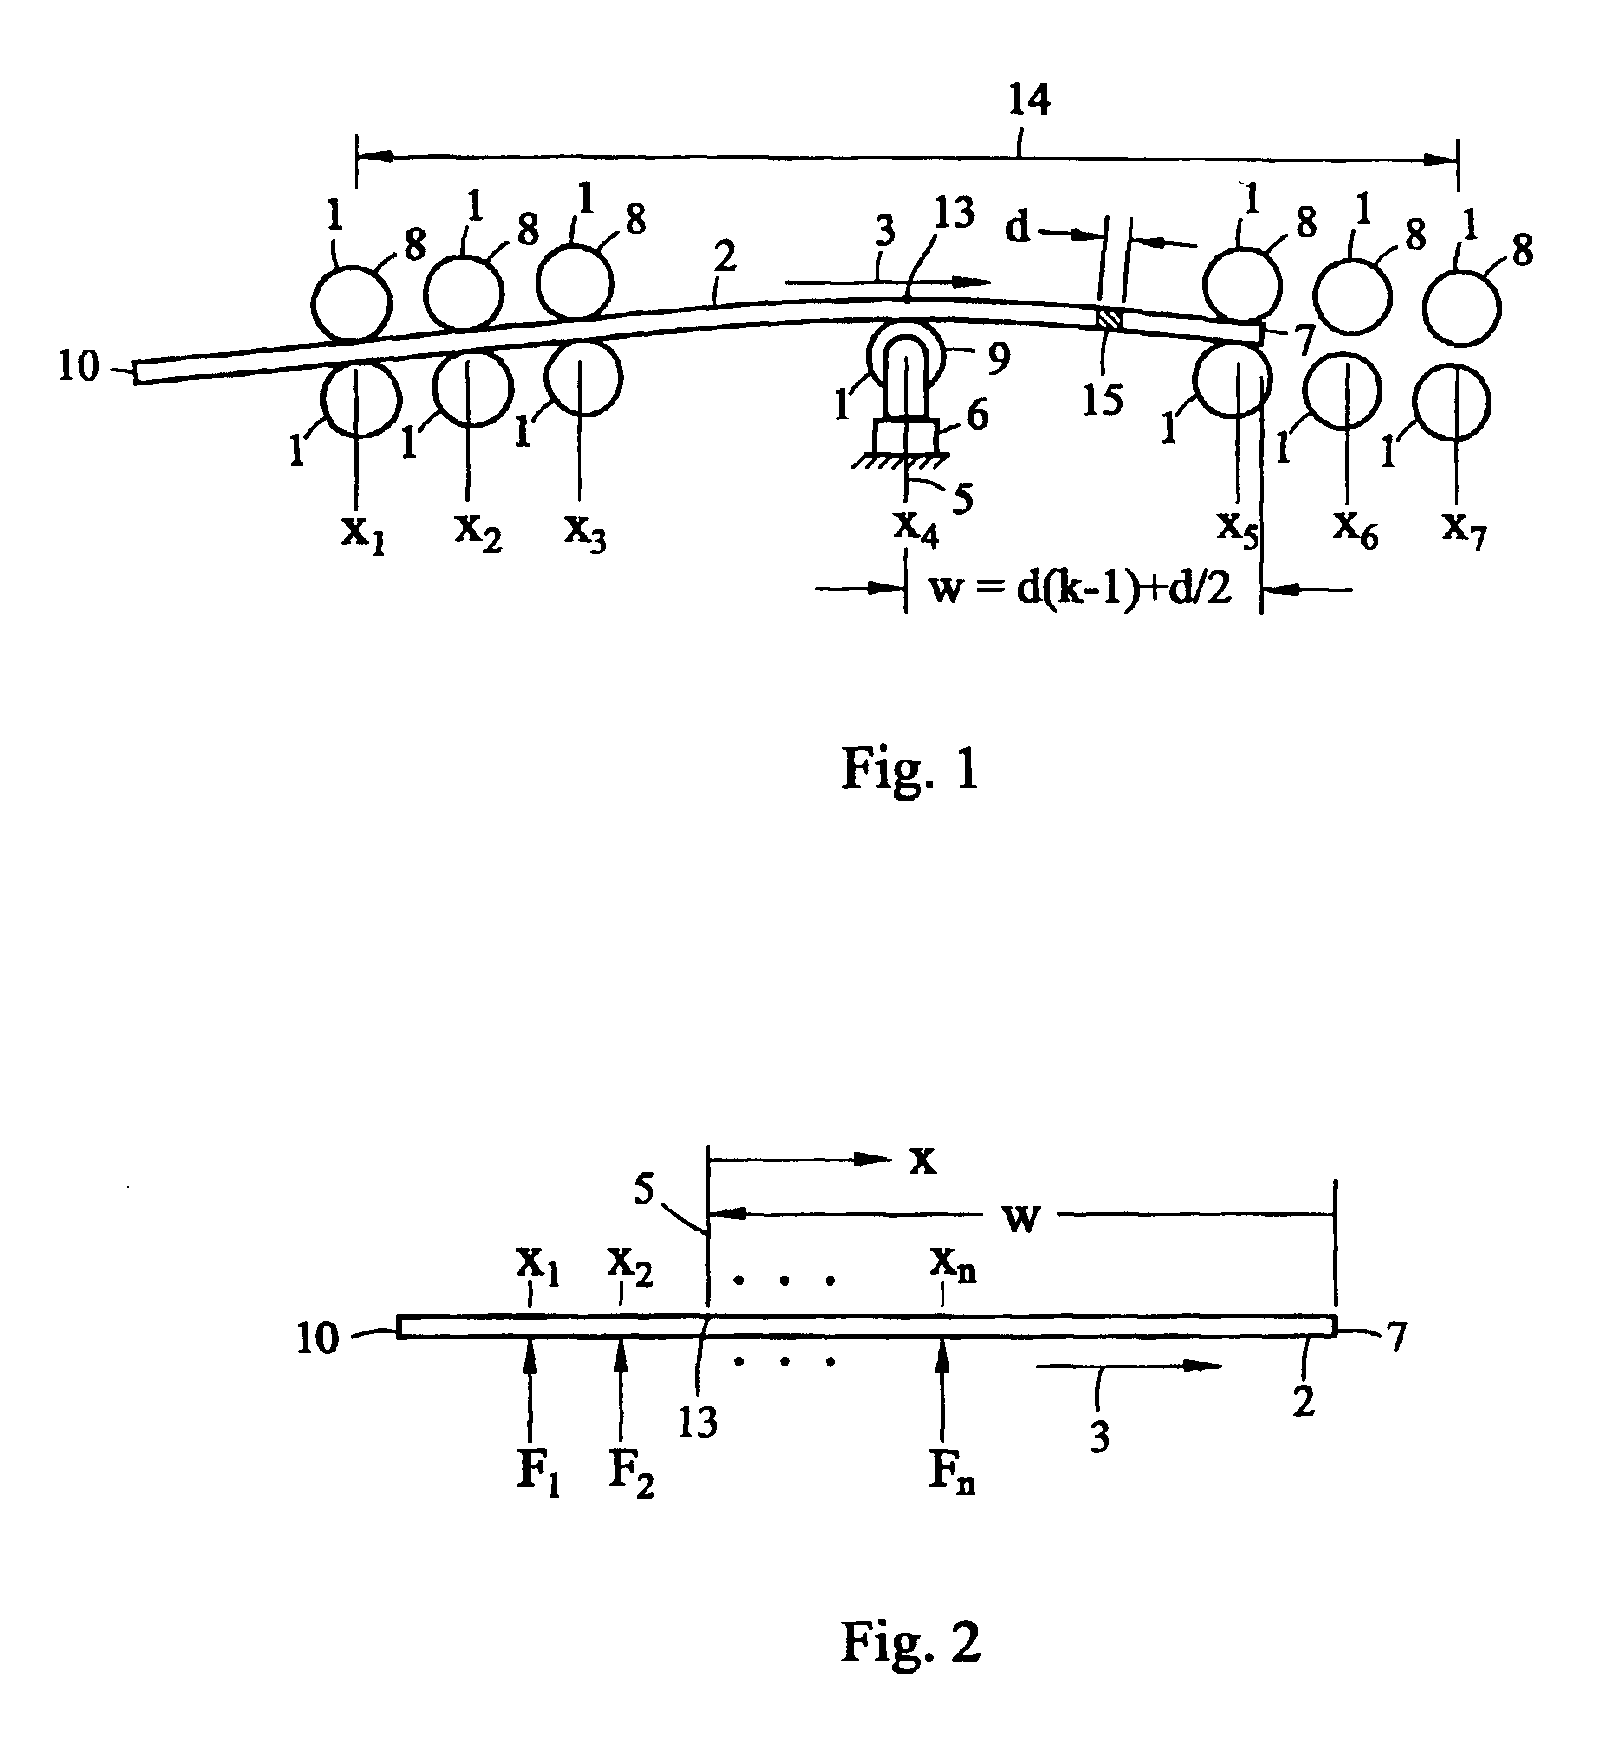 Method for estimating compliance at points along a beam from bending measurements